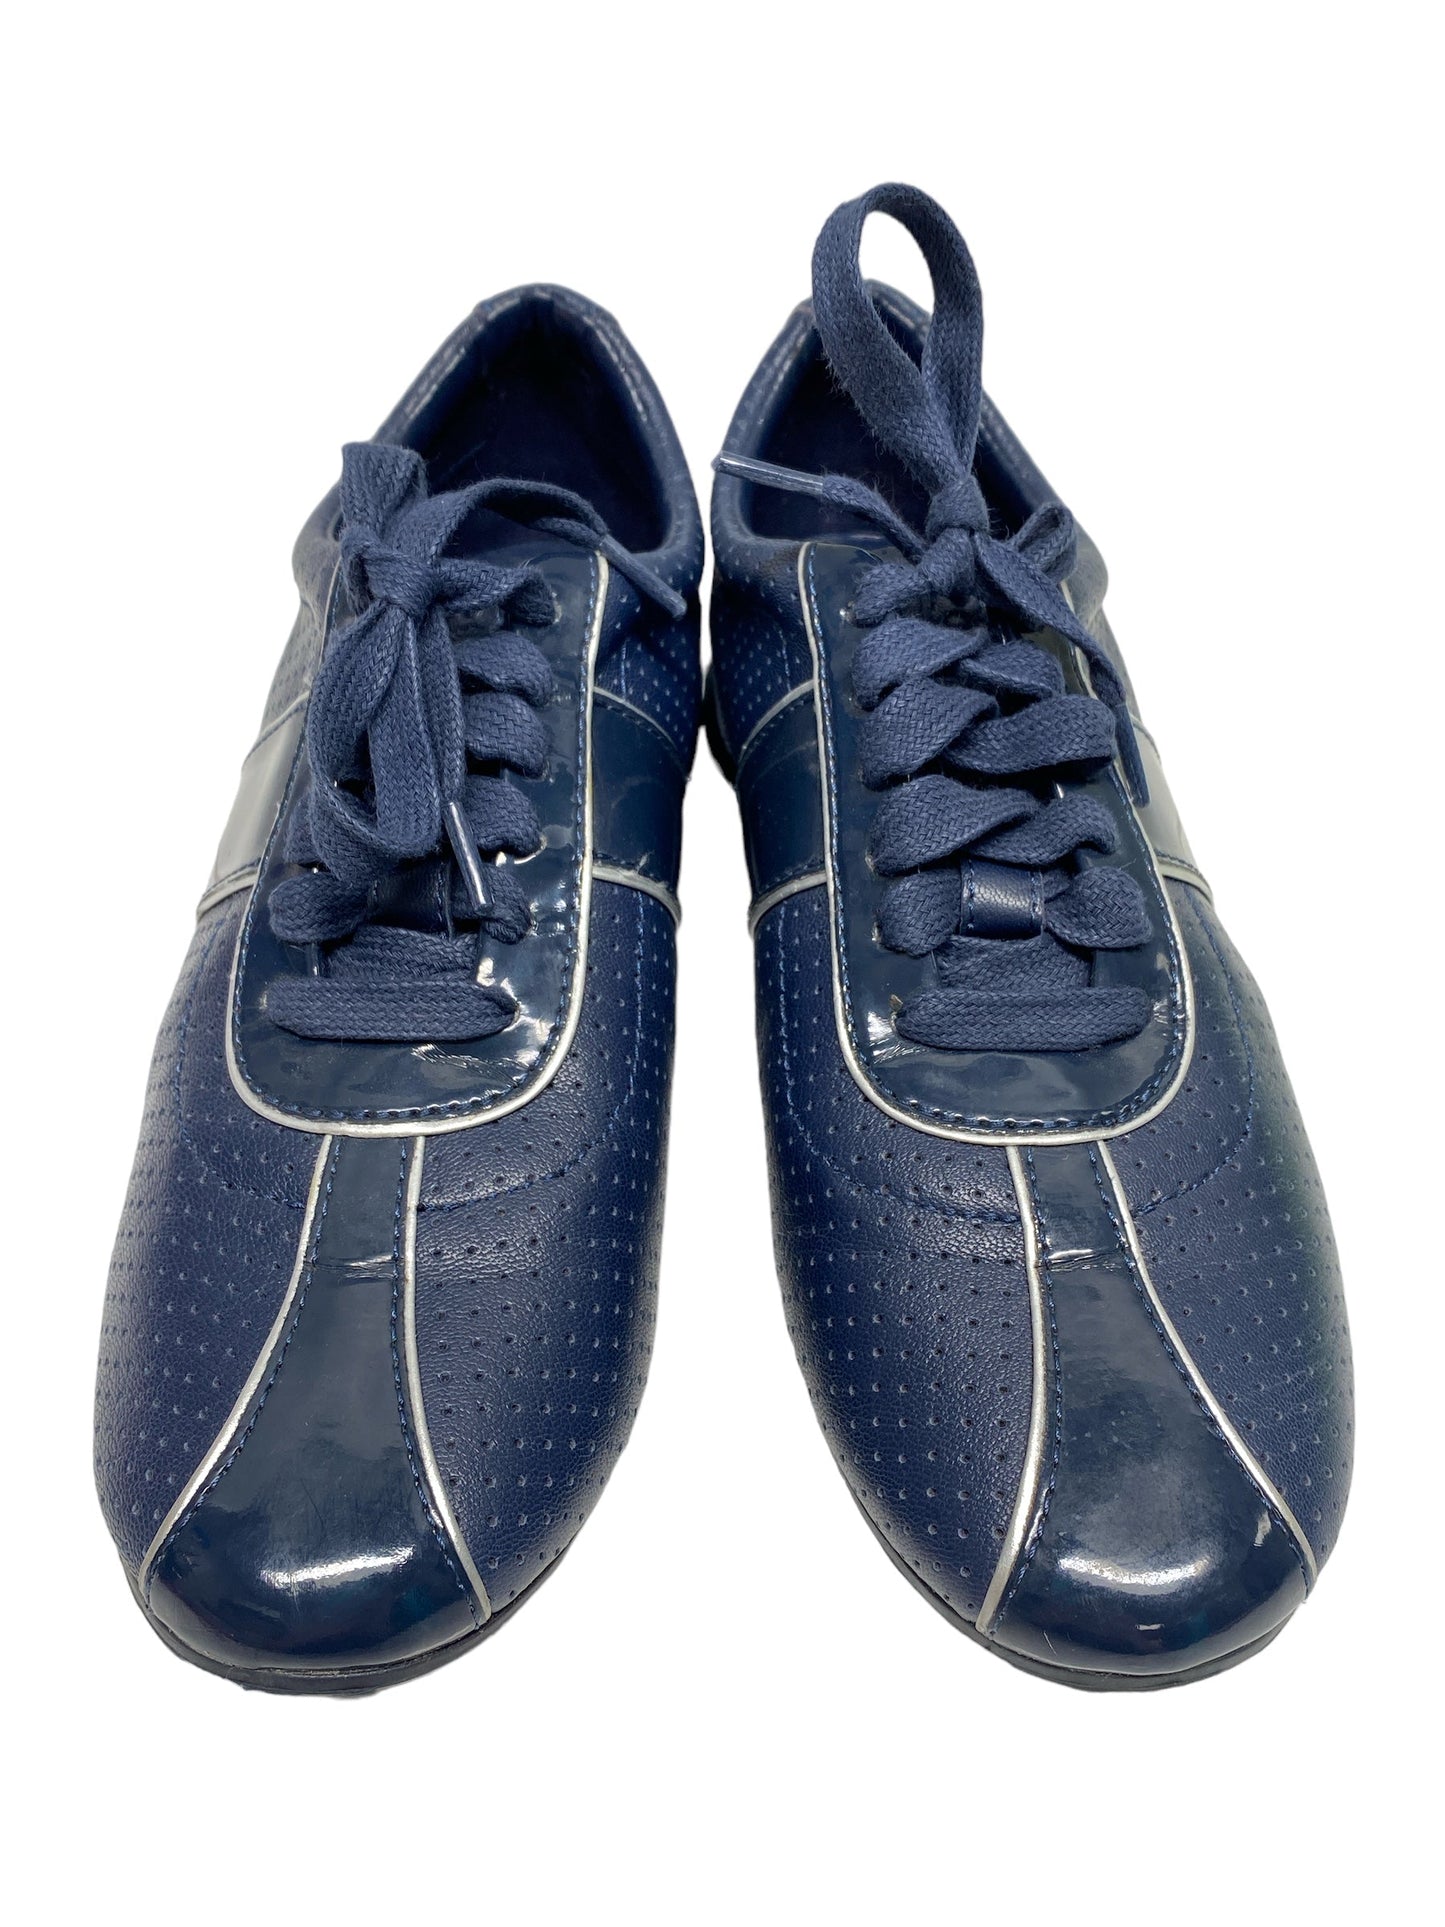 Shoes Athletic By Cole-haan  Size: 6